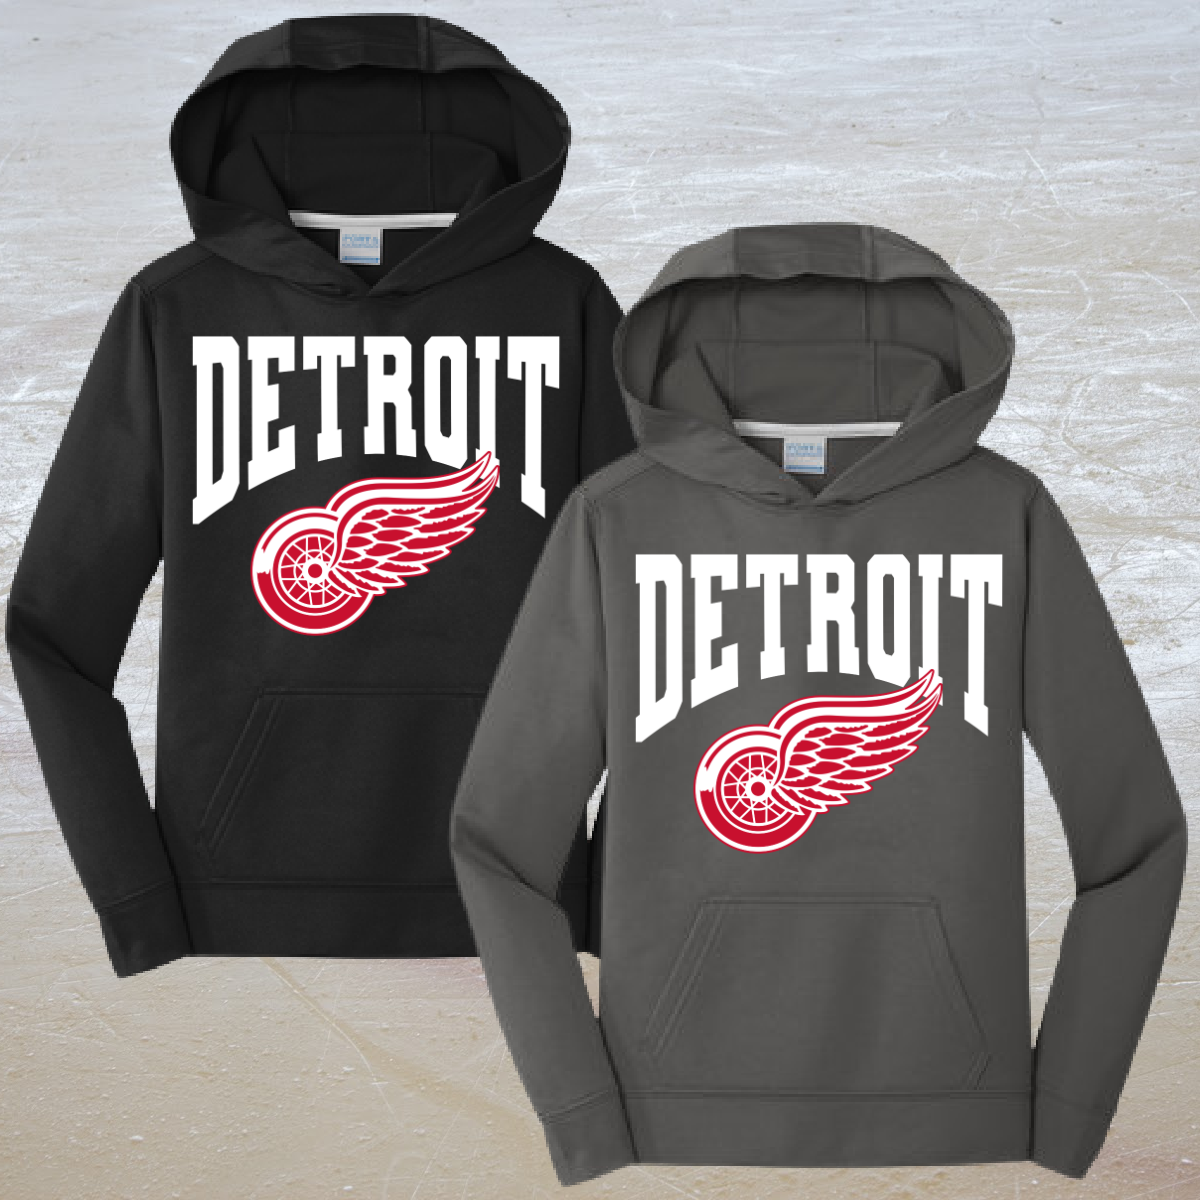 Detroit with Logo Dri-Fit Hoodie (Youth) - PREORDER - WILL SHIP BY 3/11